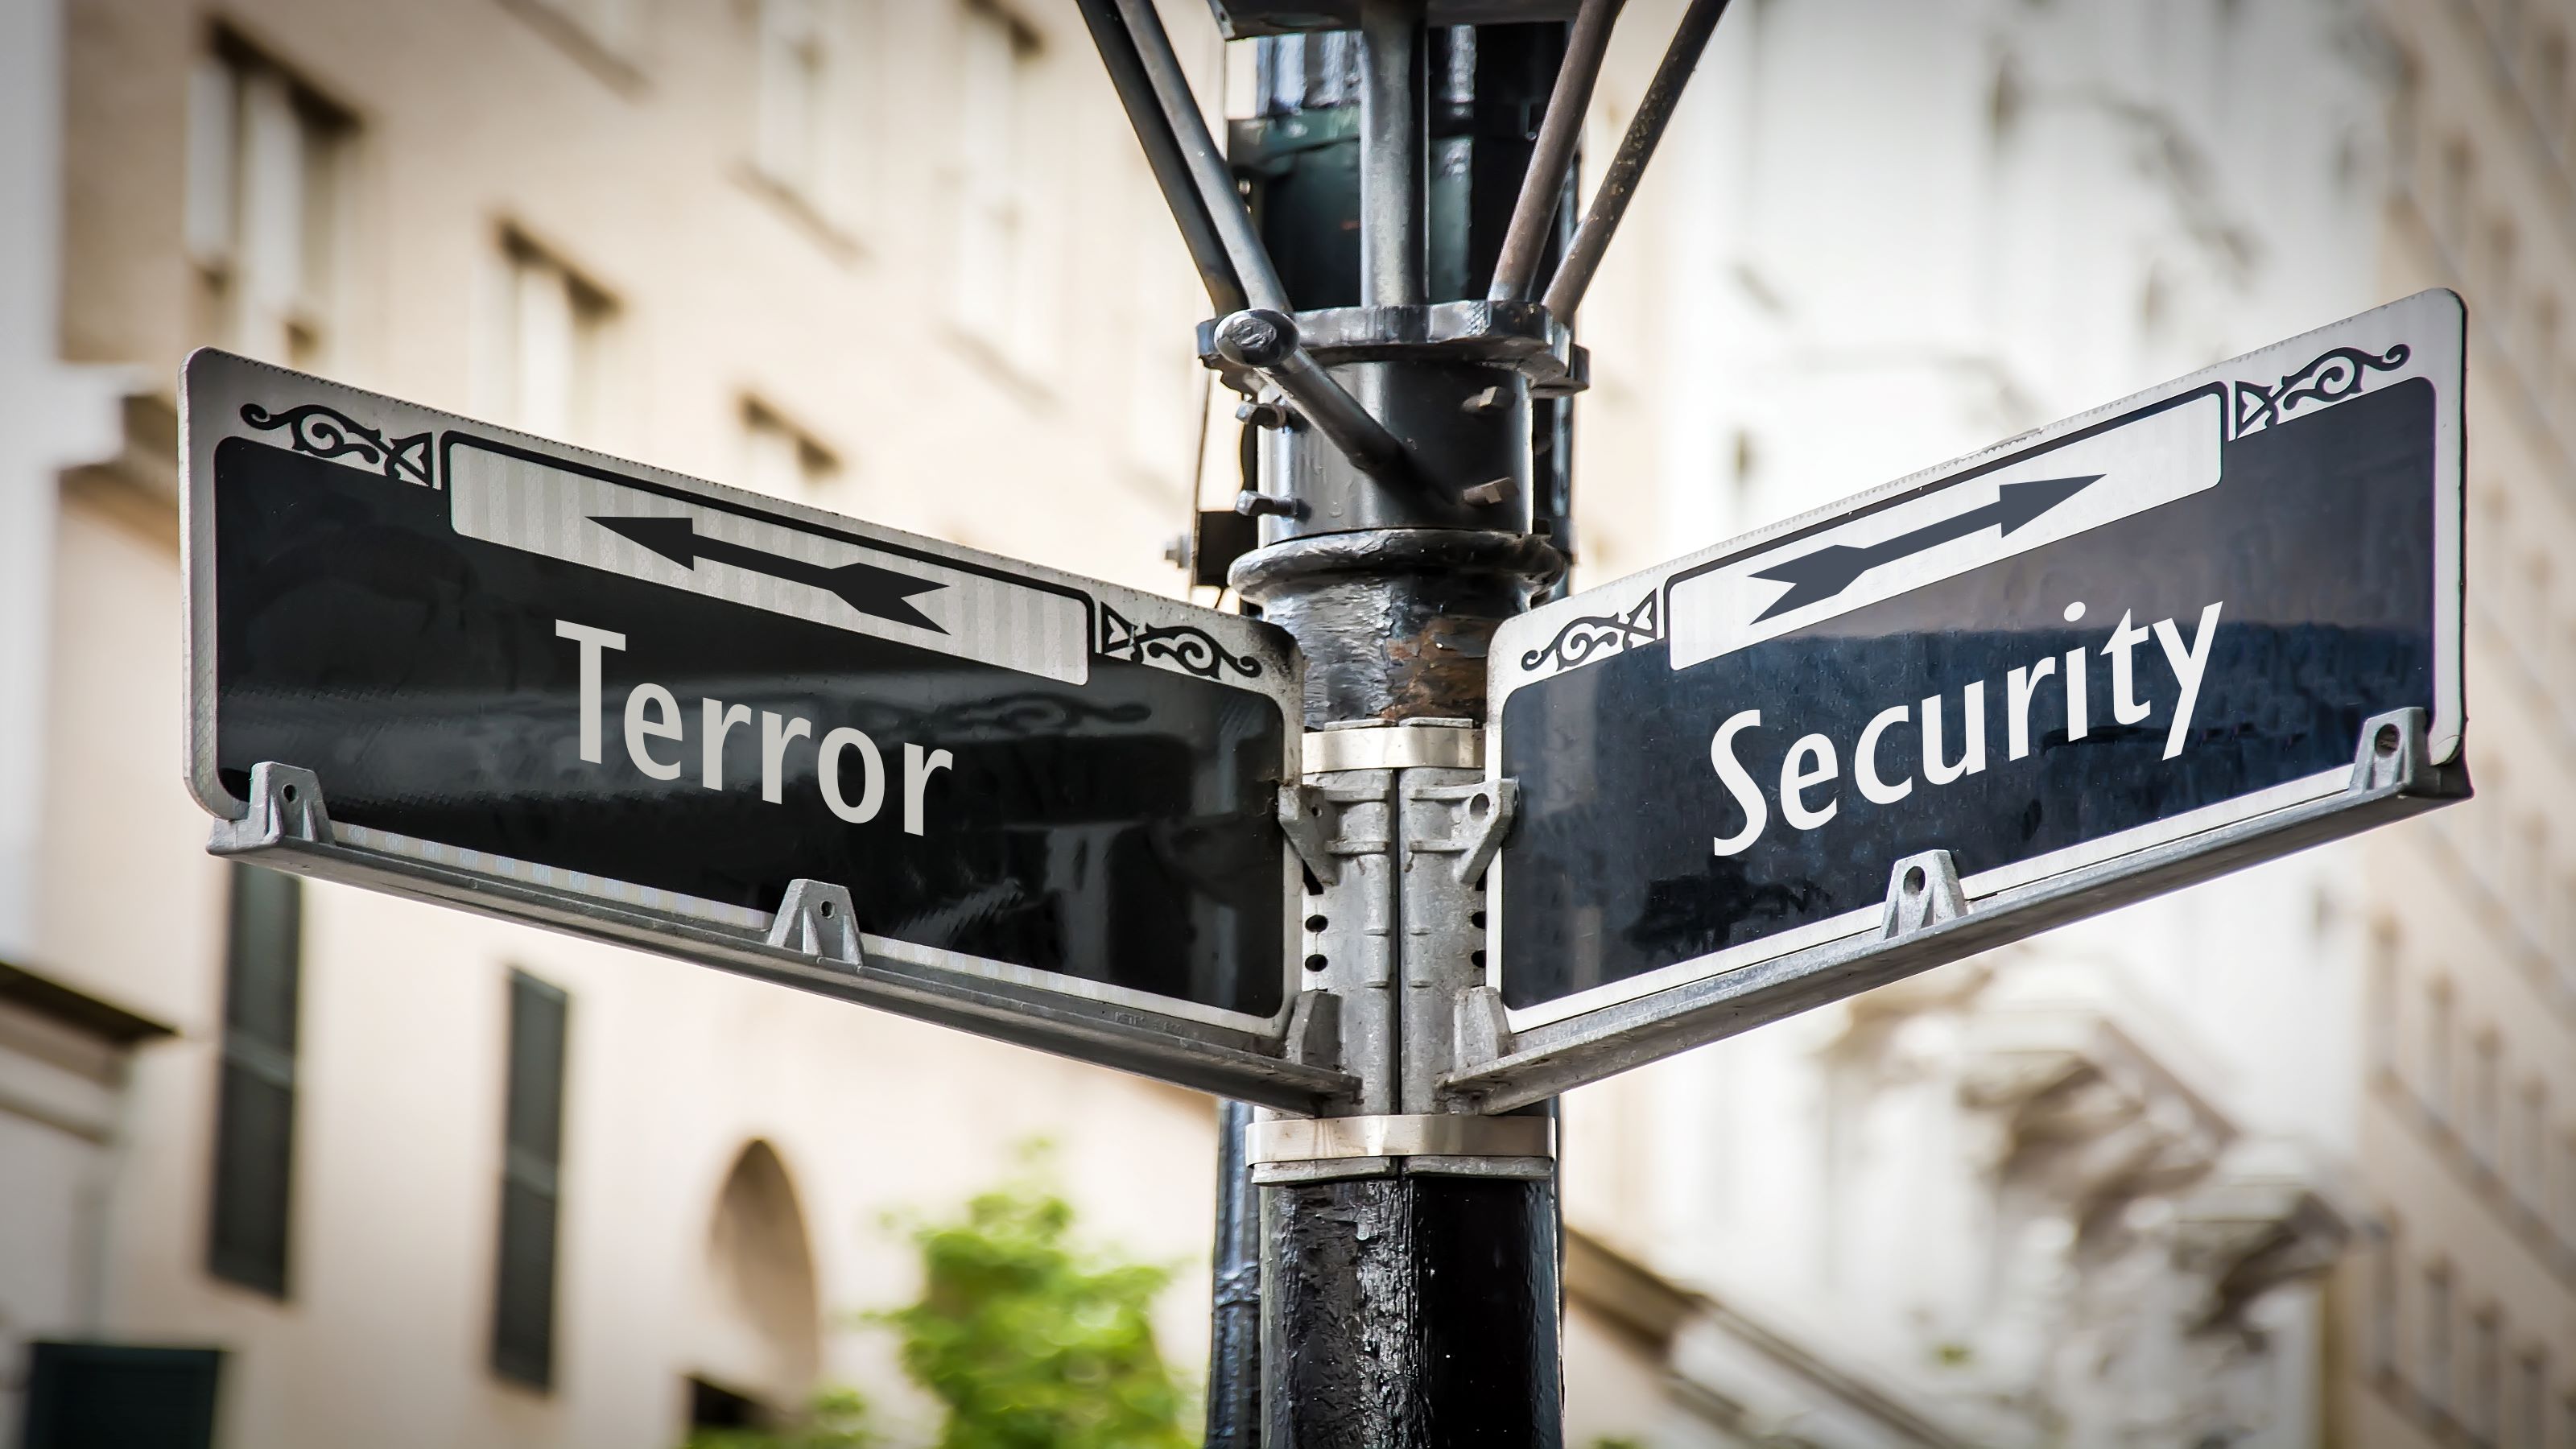 signpost with directions pointing to terror and security